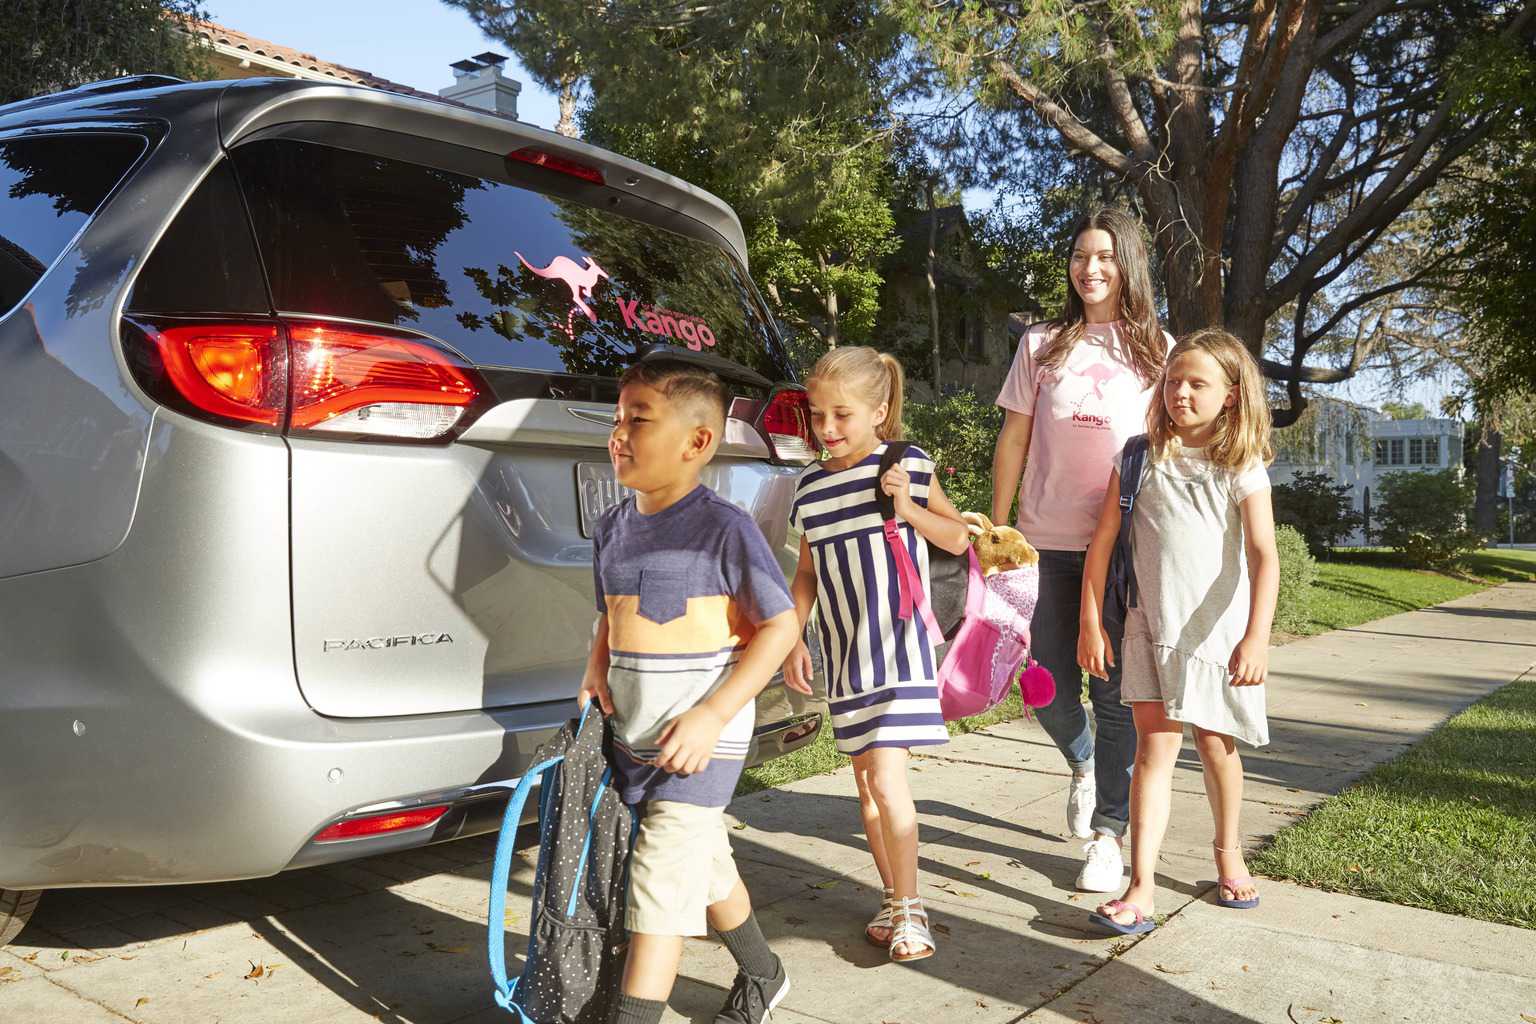 Introducing Kango, the new Uber for kids in Los Angeles! Toting multiple kids around town and taking them to their extracurricular activities can quickly go from an annoying chore to a never-ending task that consumes your life. With Kango, now you can get all your kids to their activities on time!